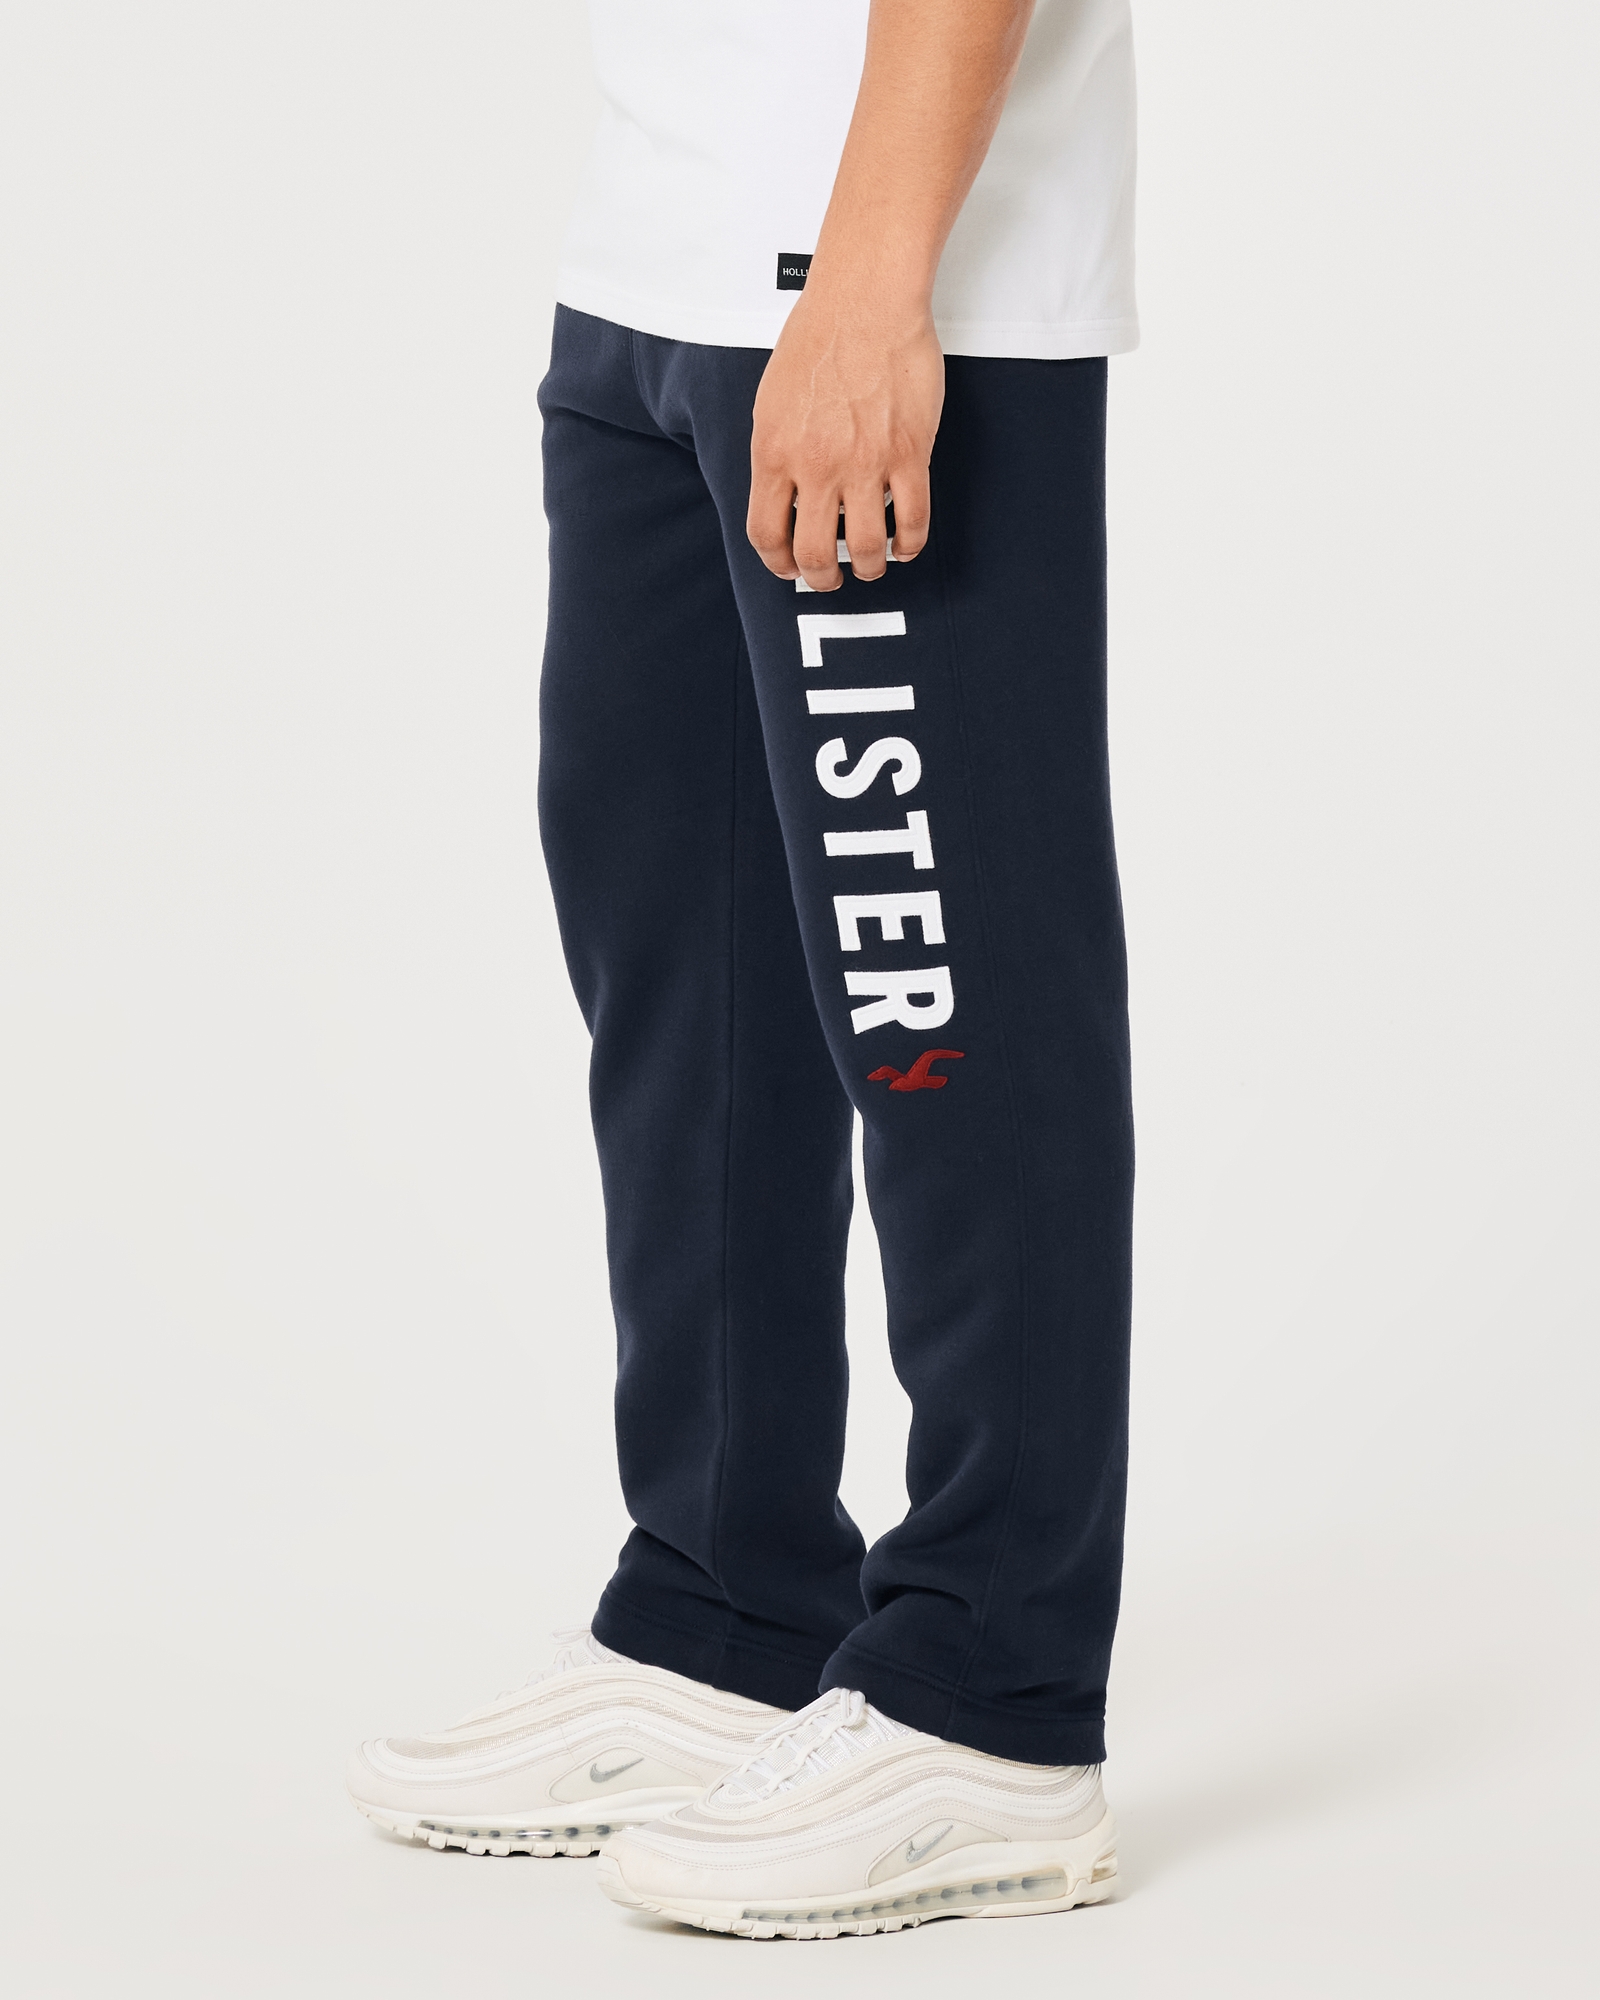 https://img.hollisterco.com/is/image/anf/KIC_334-3059-0893-200_model3.jpg?policy=product-extra-large